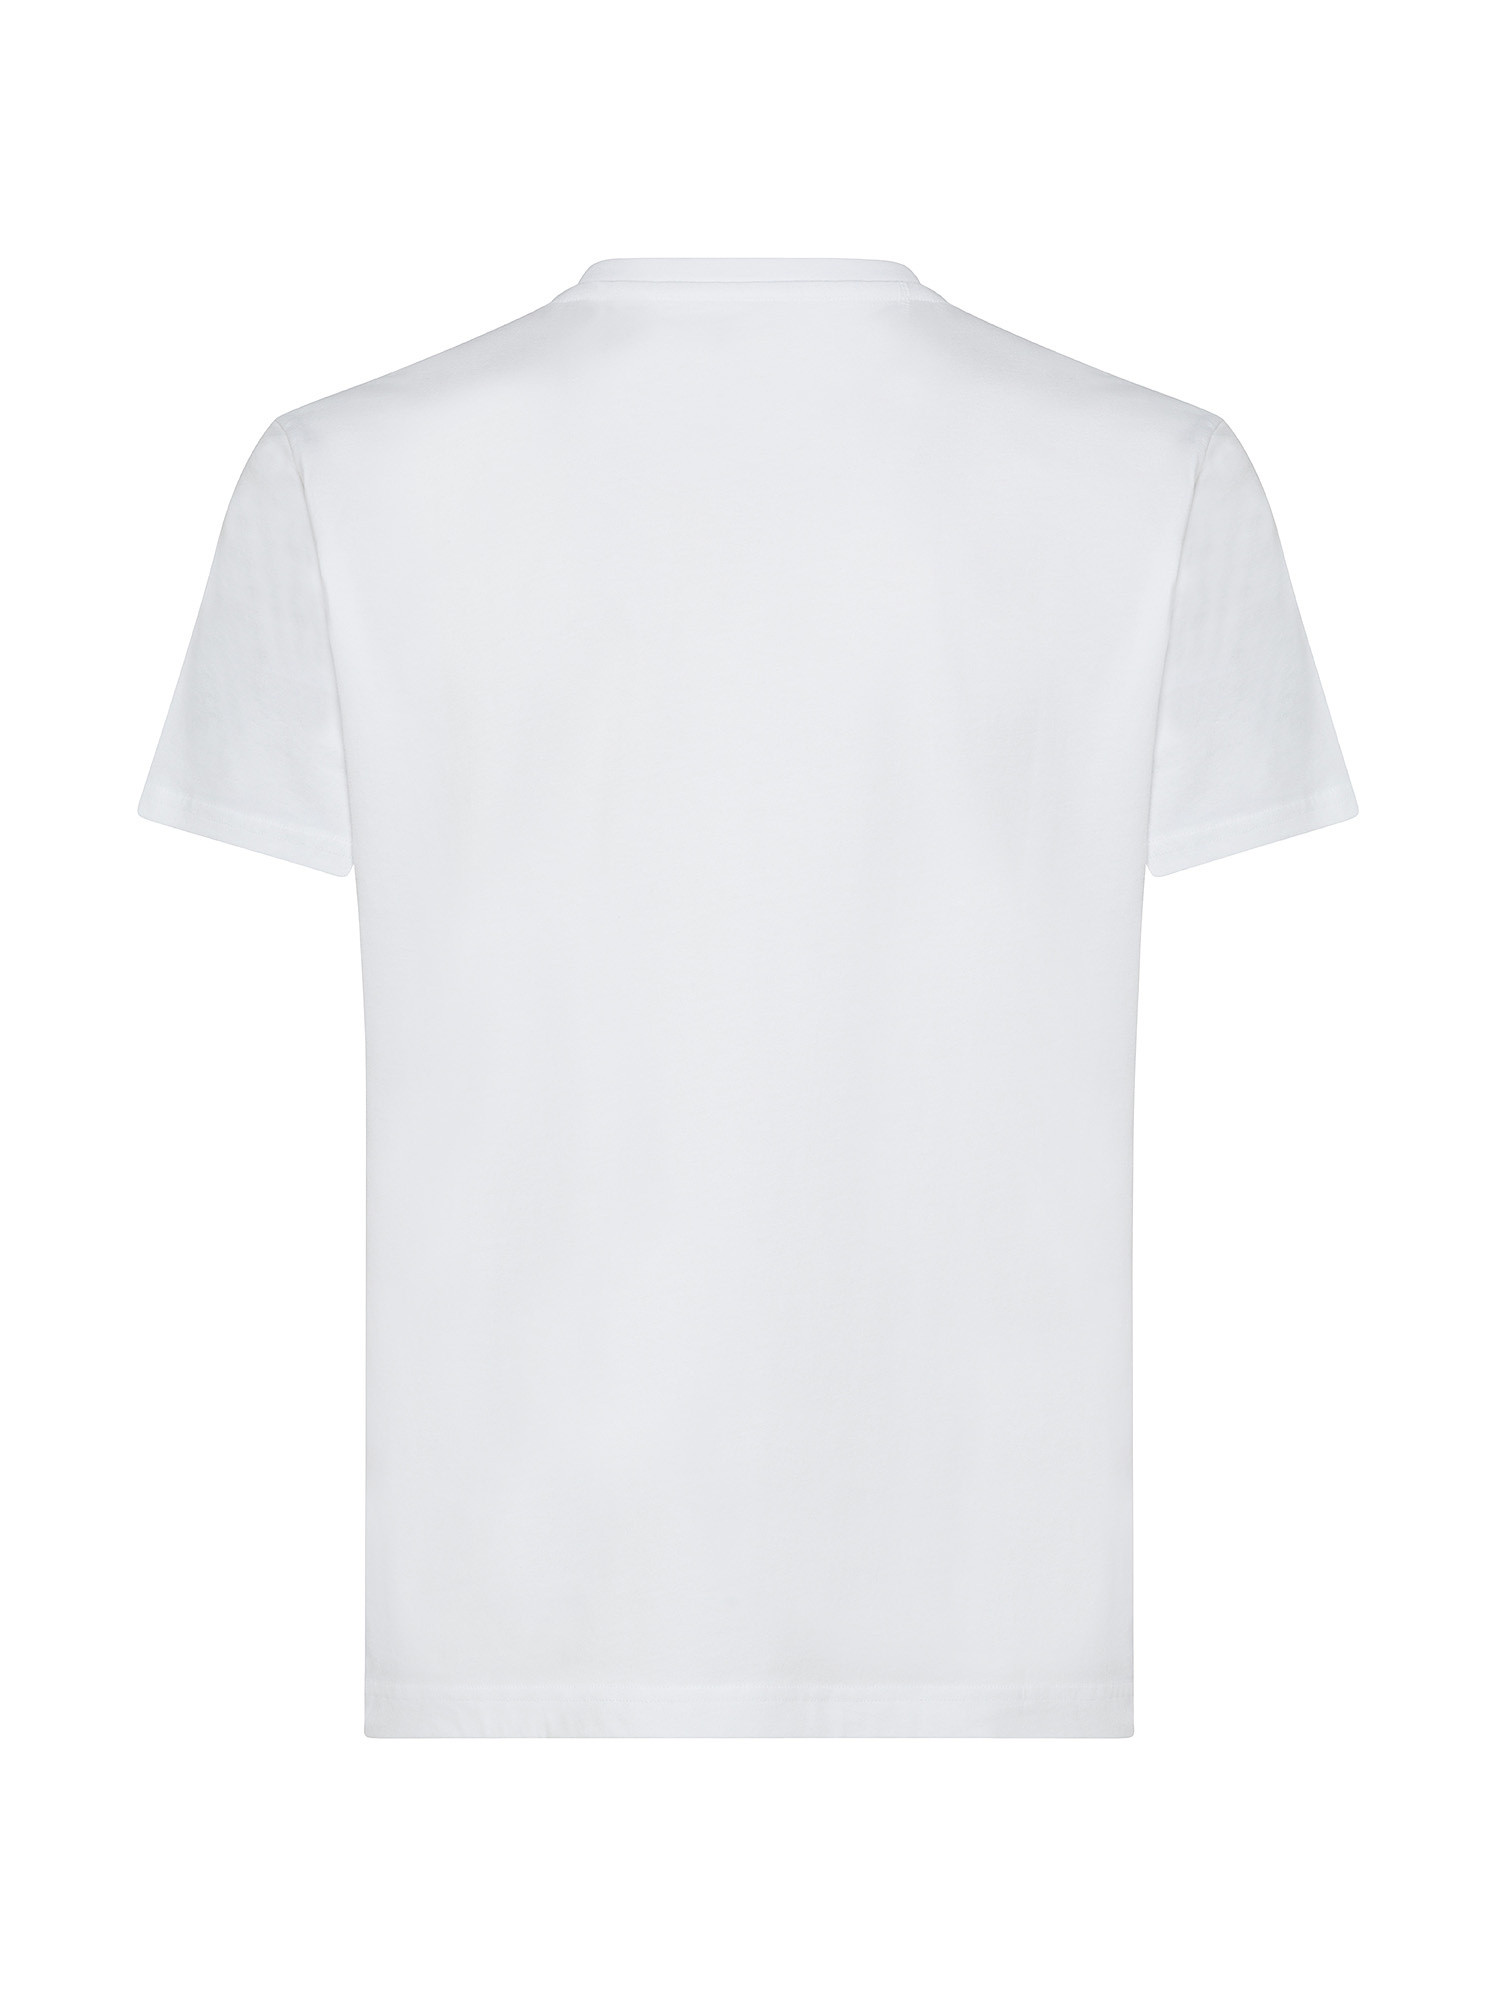 La Martina - Short-sleeved T-shirt in jersey cotton, White, large image number 1